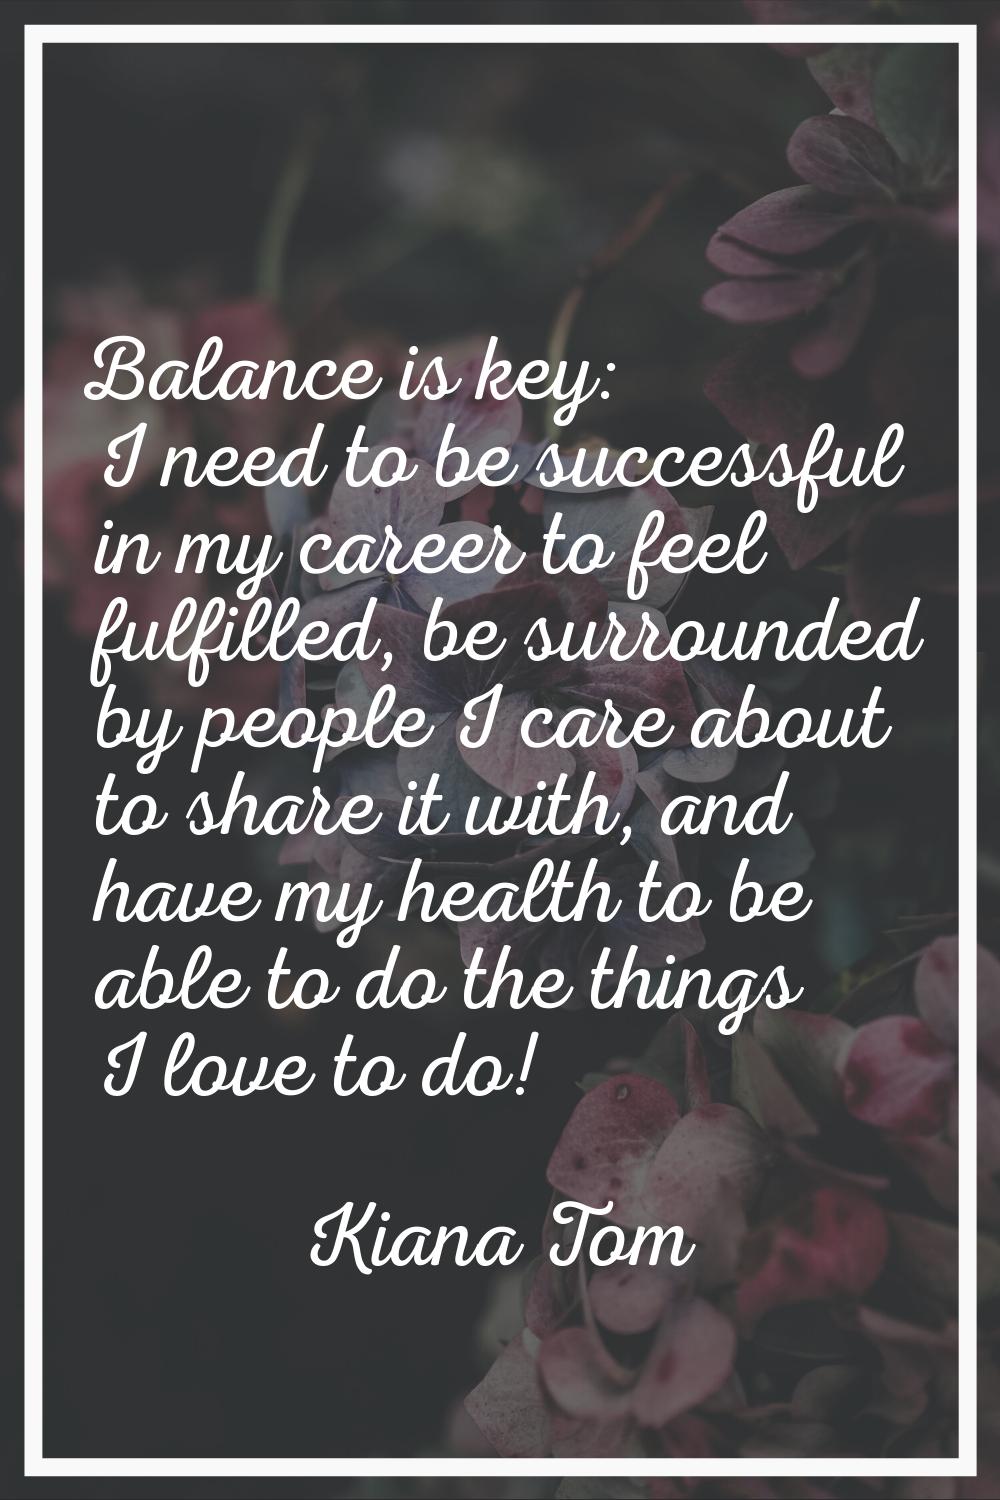 Balance is key: I need to be successful in my career to feel fulfilled, be surrounded by people I c